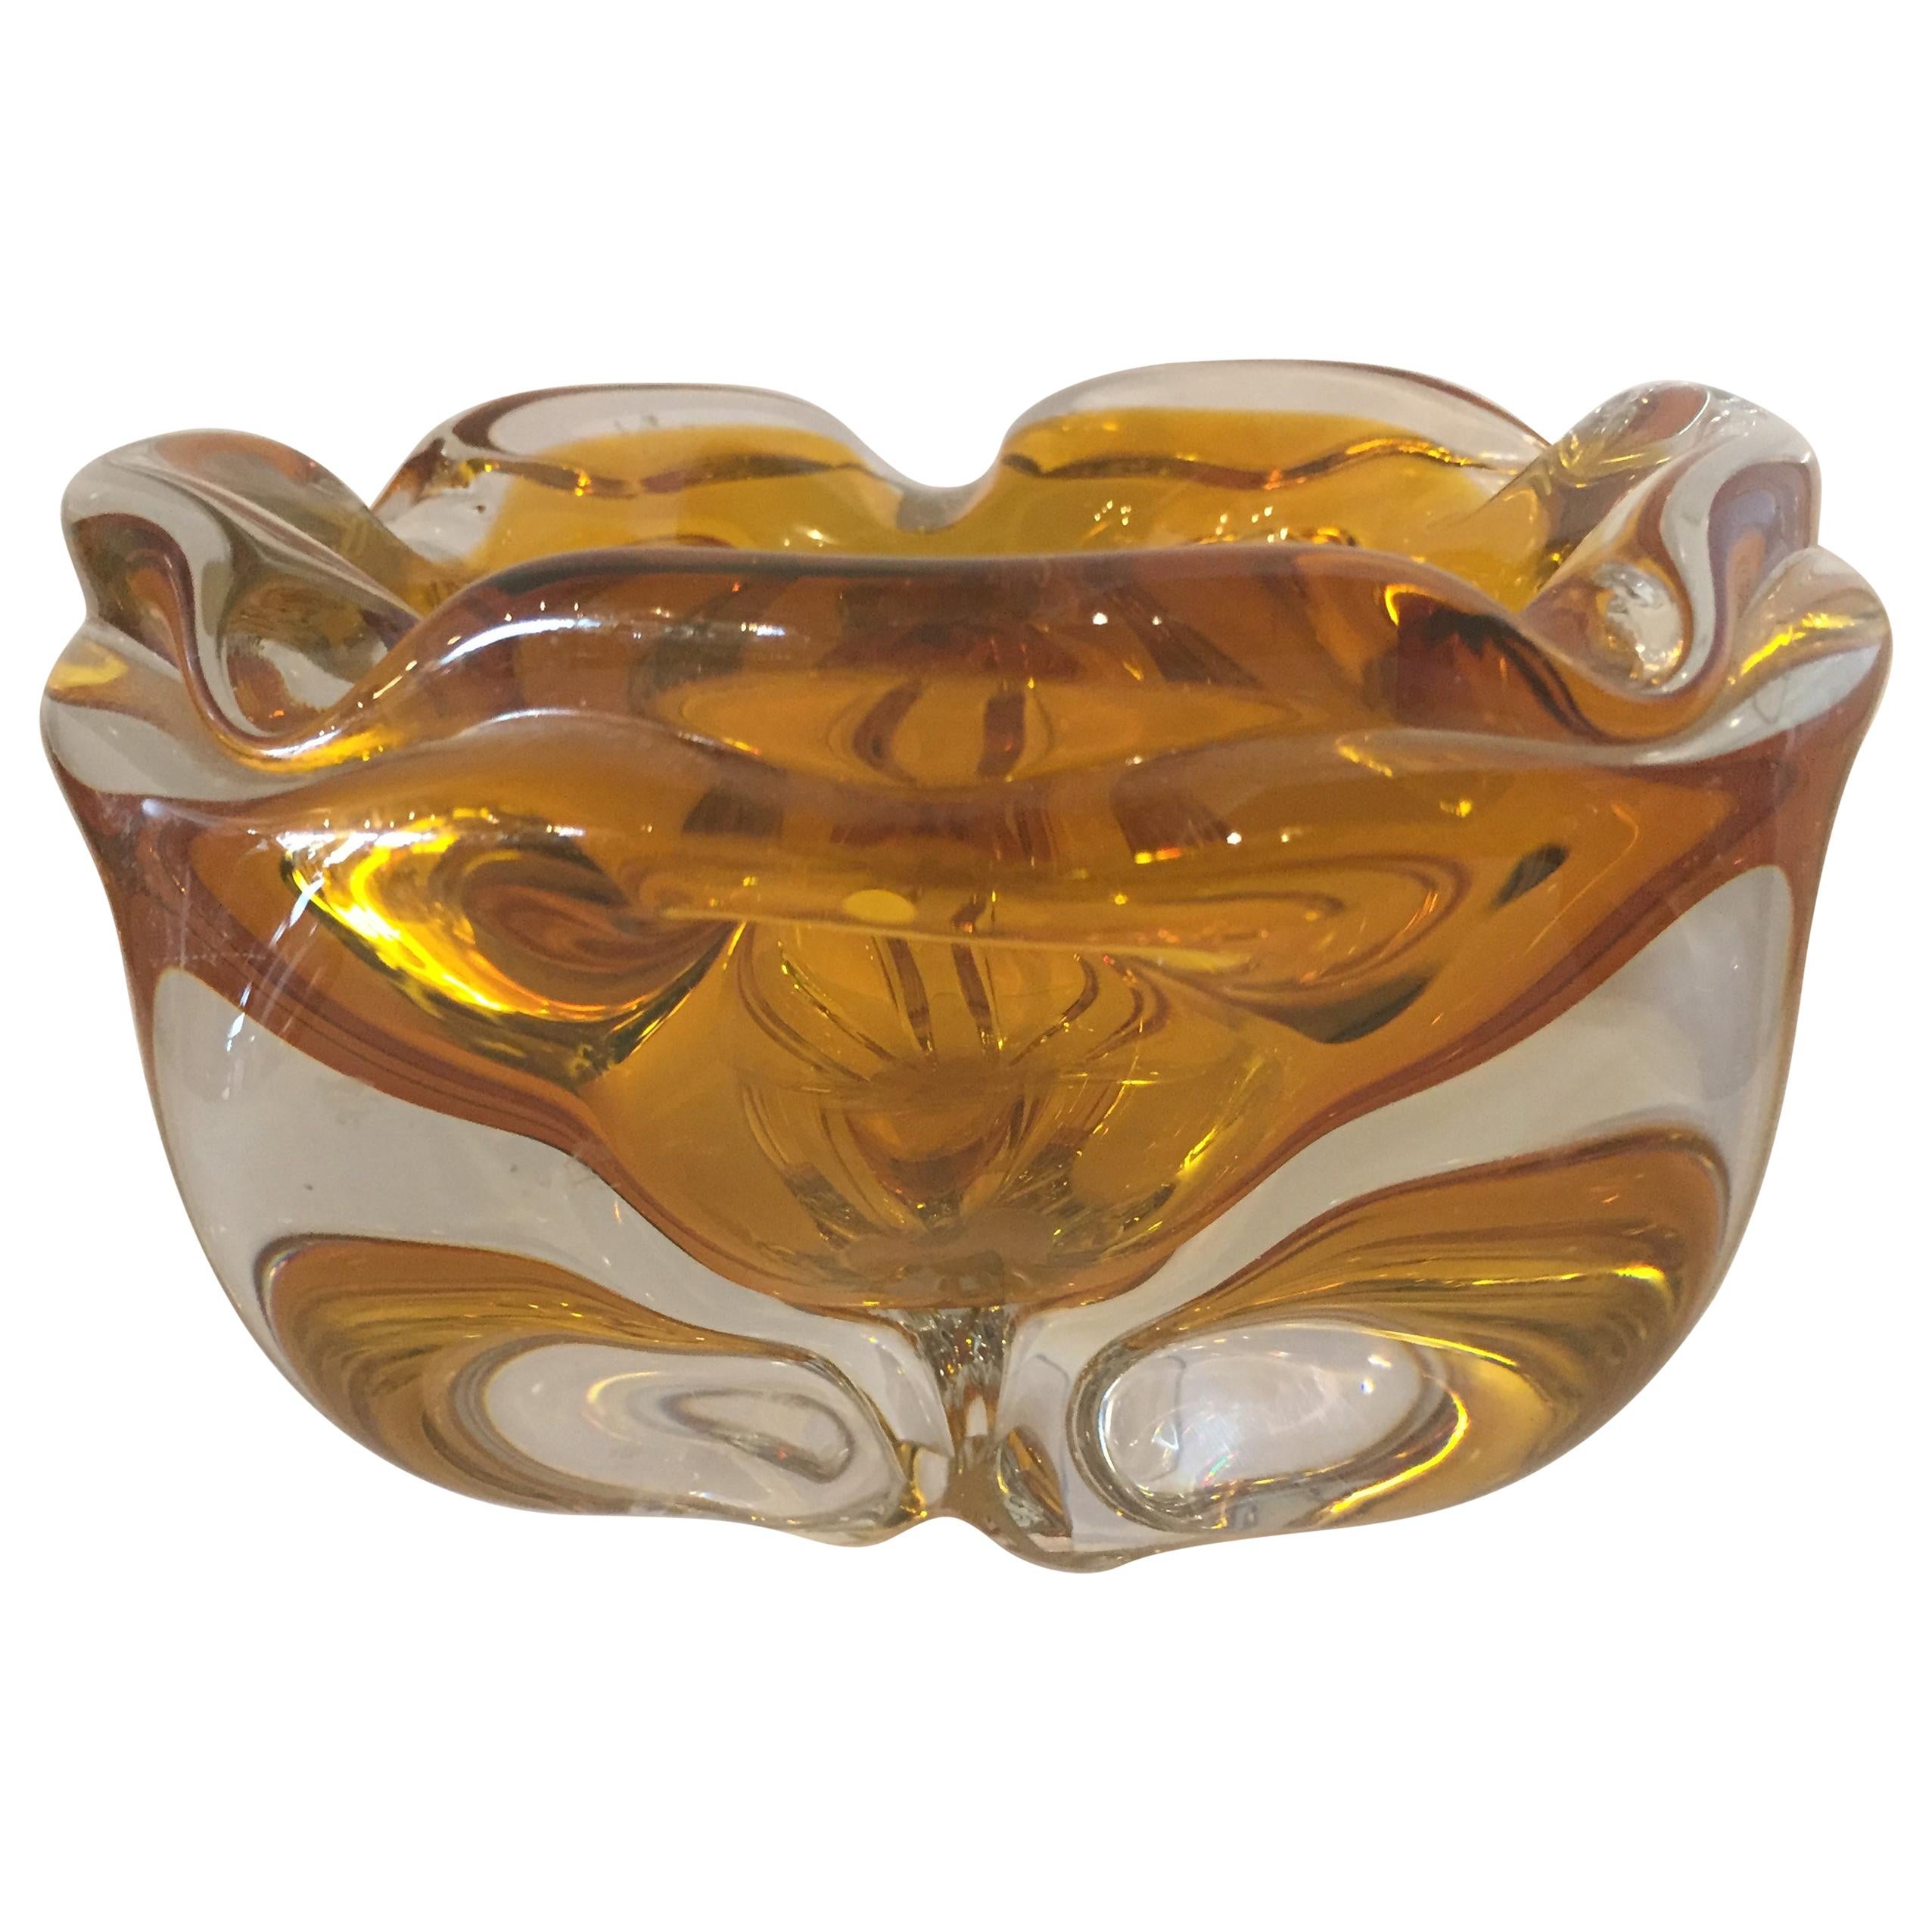 Extra Large Murano Citrine and Amber to Clear Ash Tray or Bowl